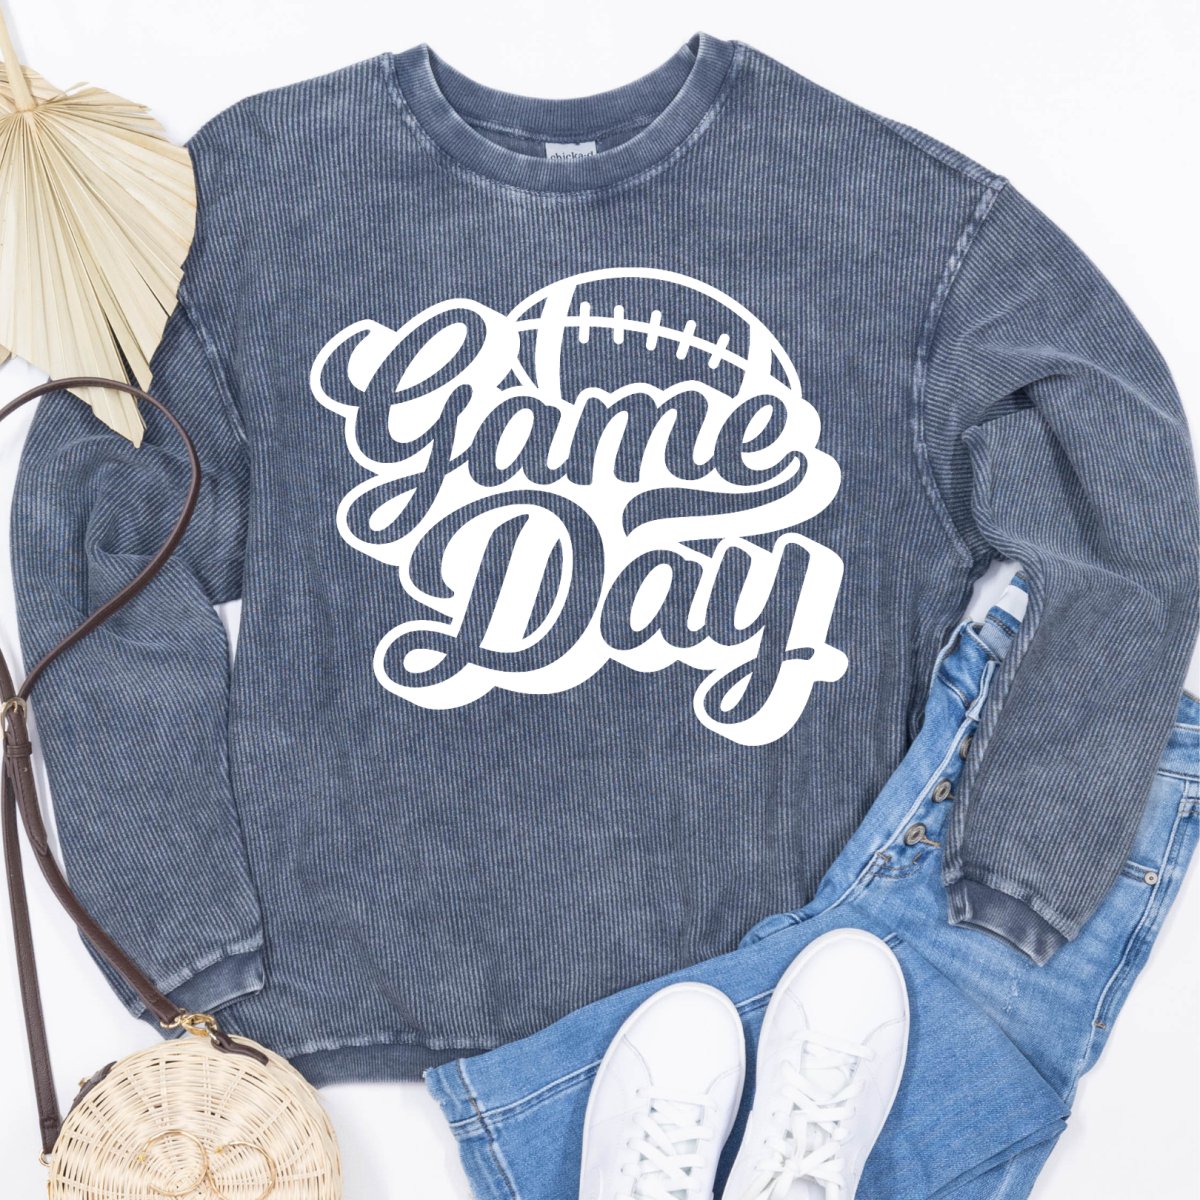 Game Day Corded Crew - Limeberry Designs